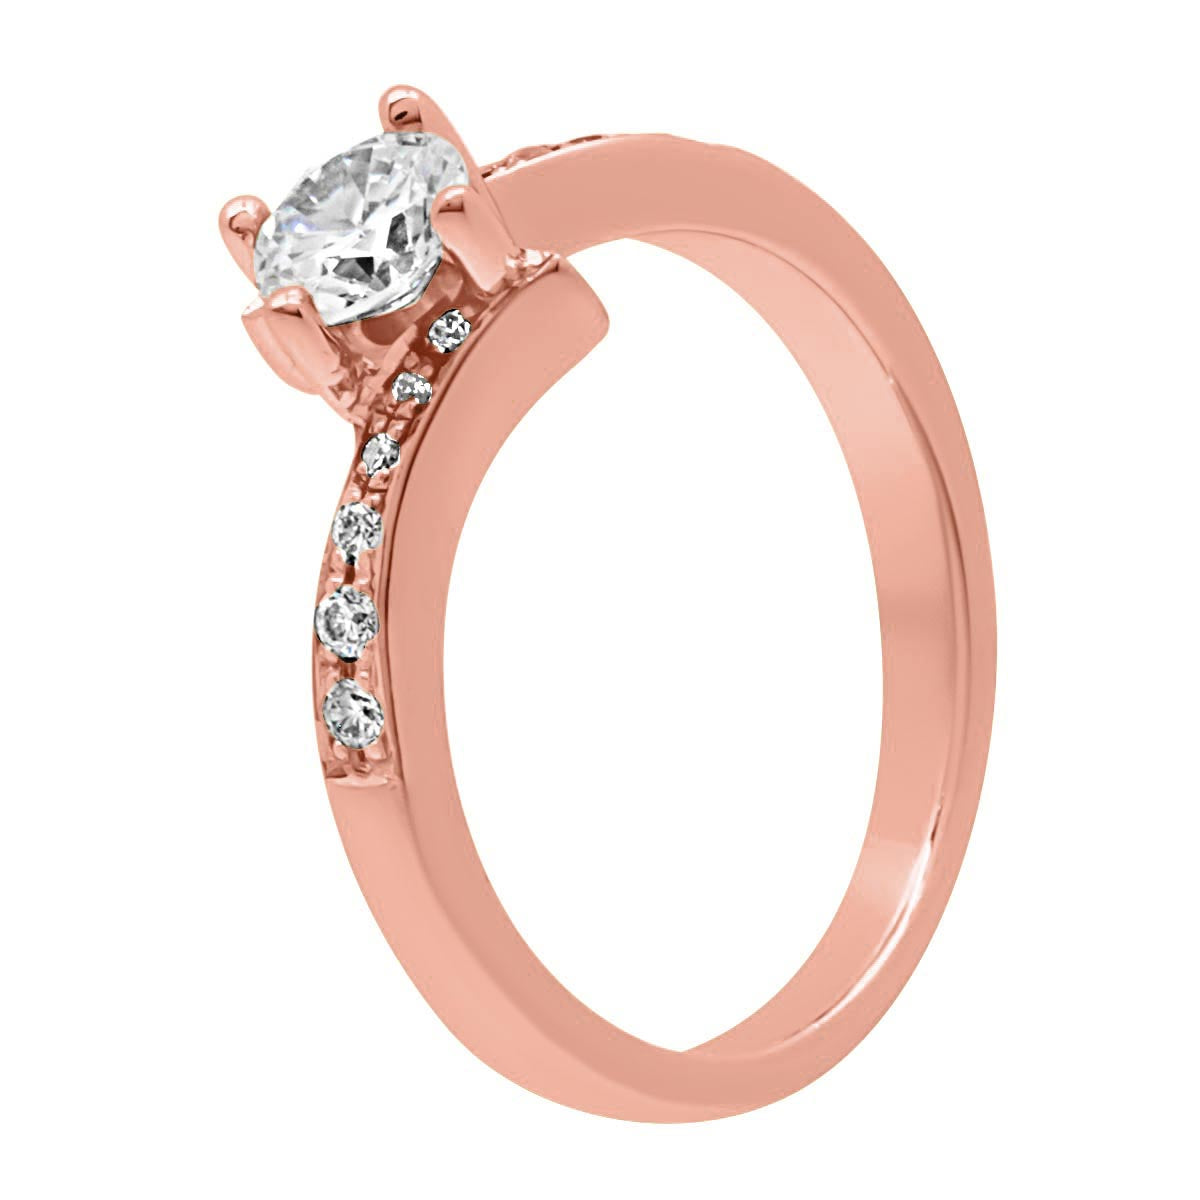 Quirky Diamond Engagement Ring in rose gold at an angle